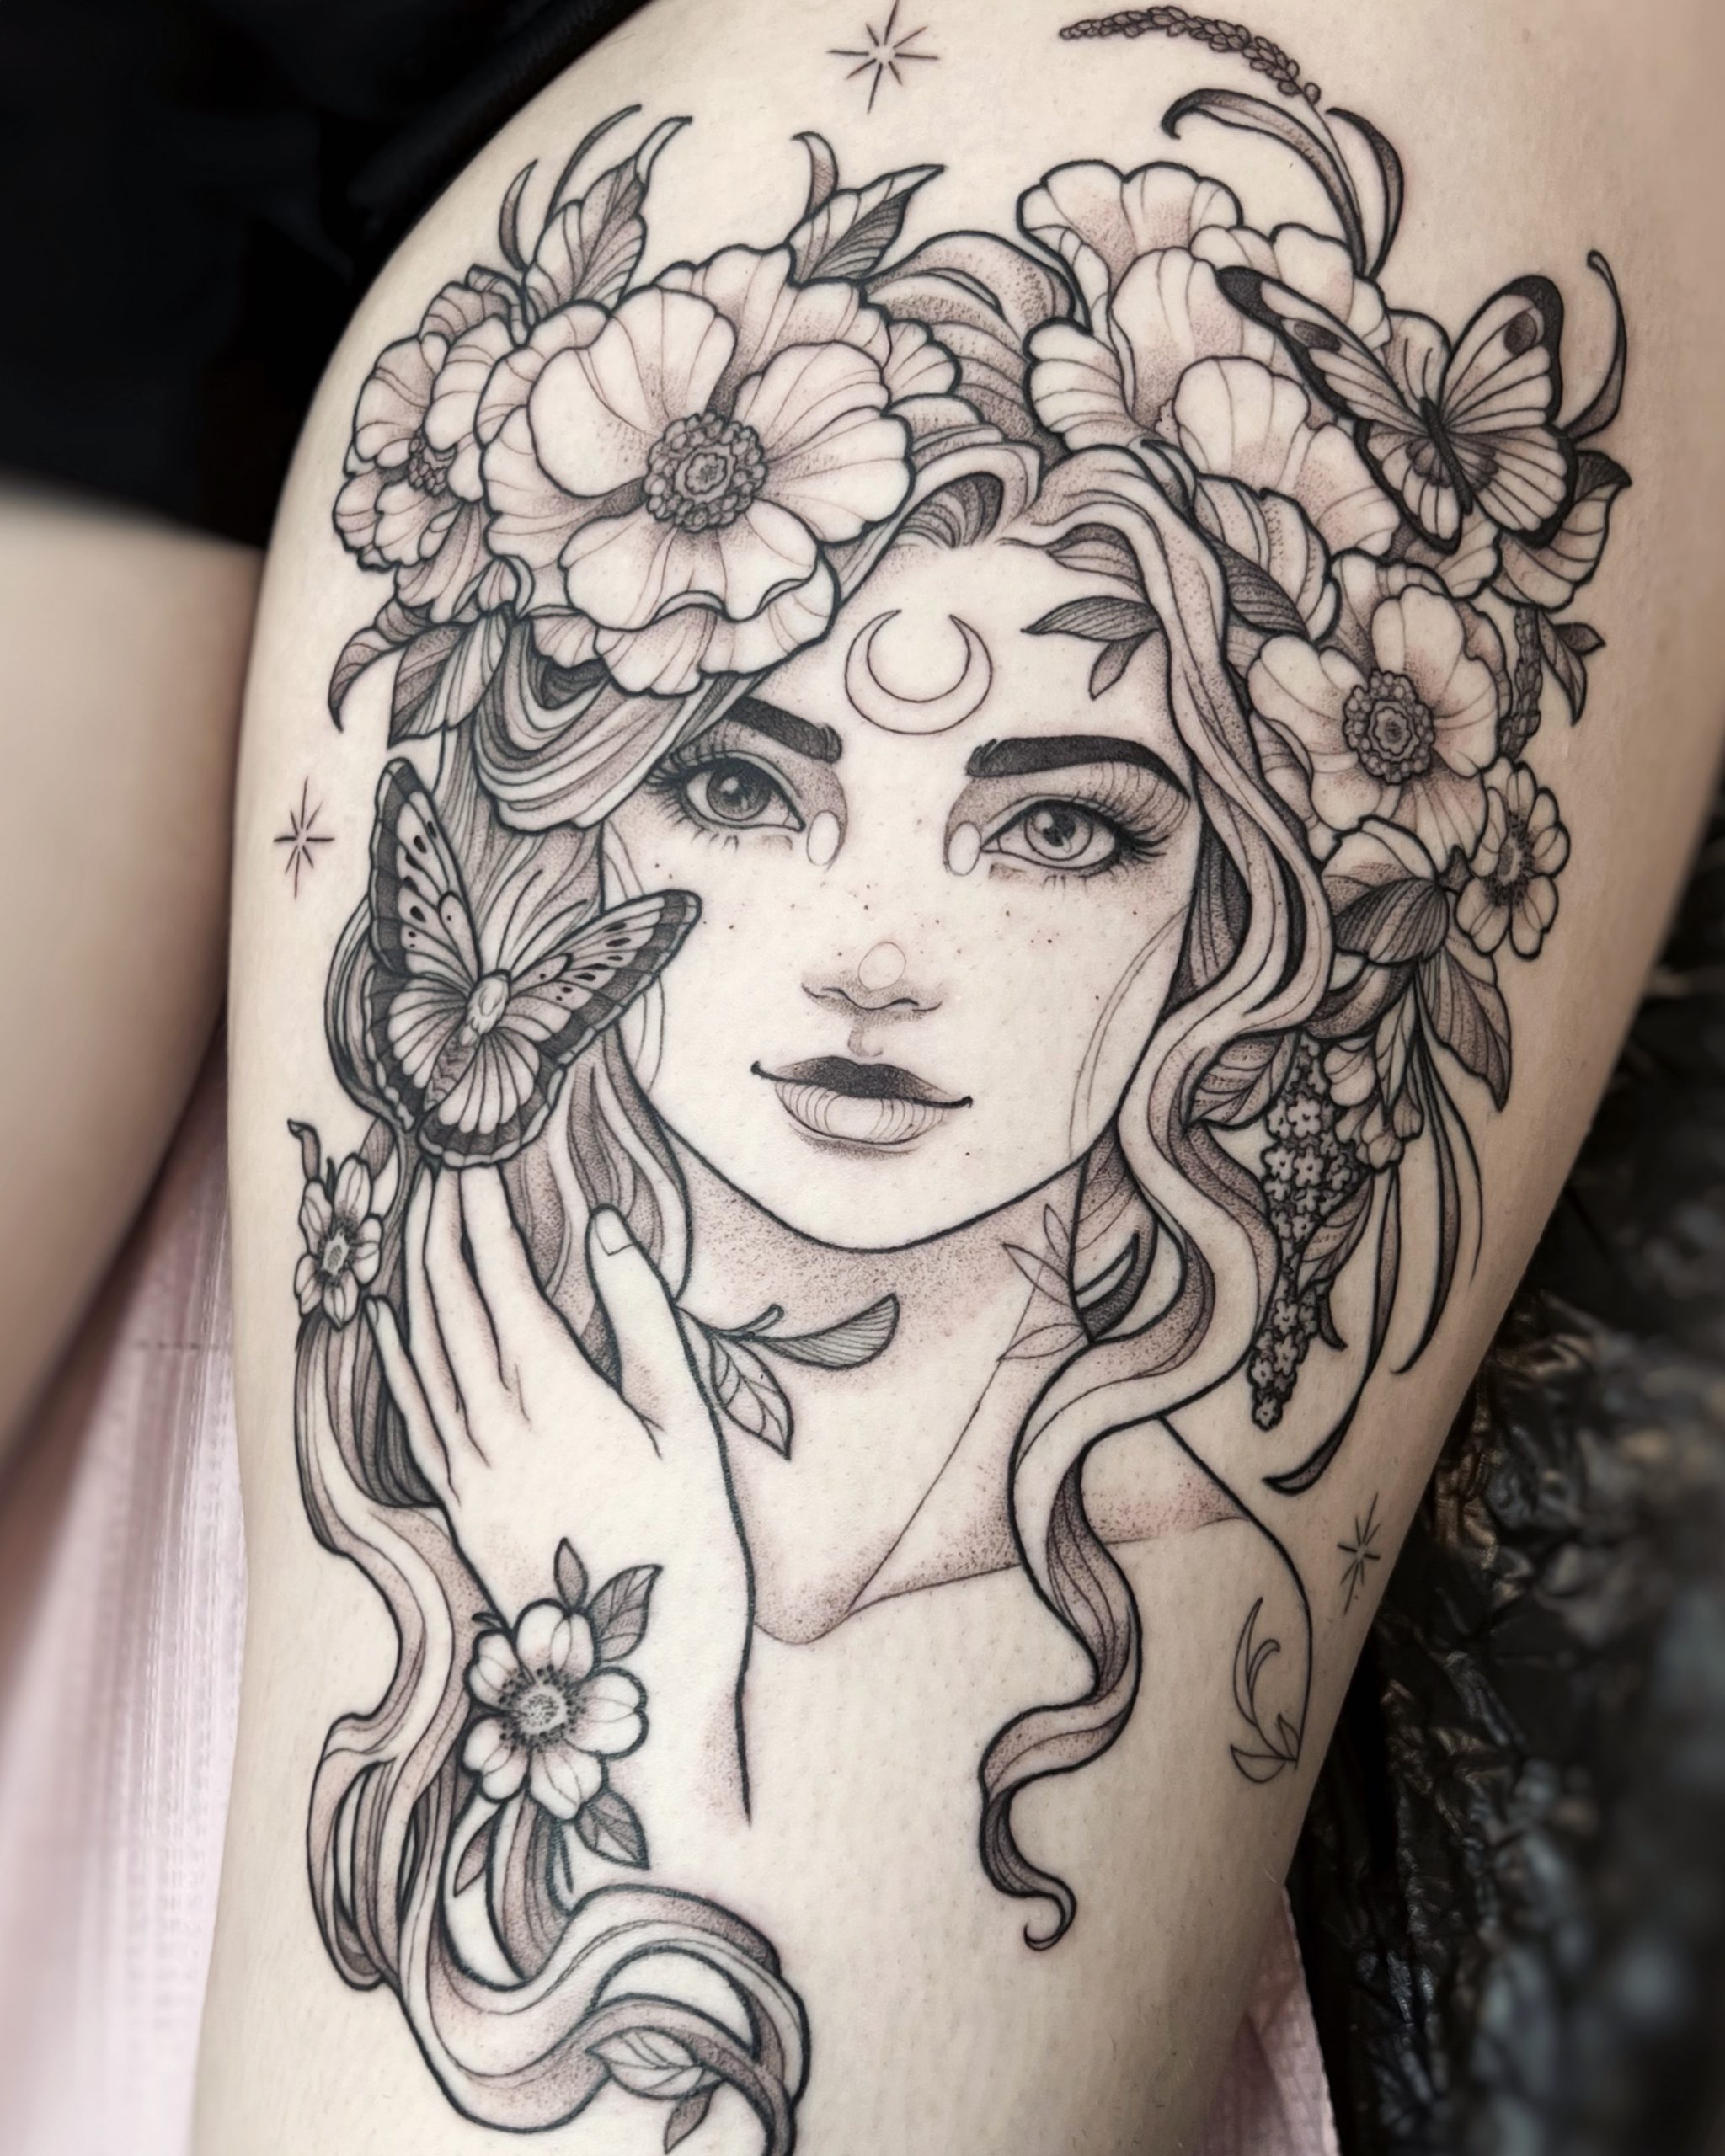 15 Nostalgic 90s Tattoos From Your Time Capsule  Tattoodo